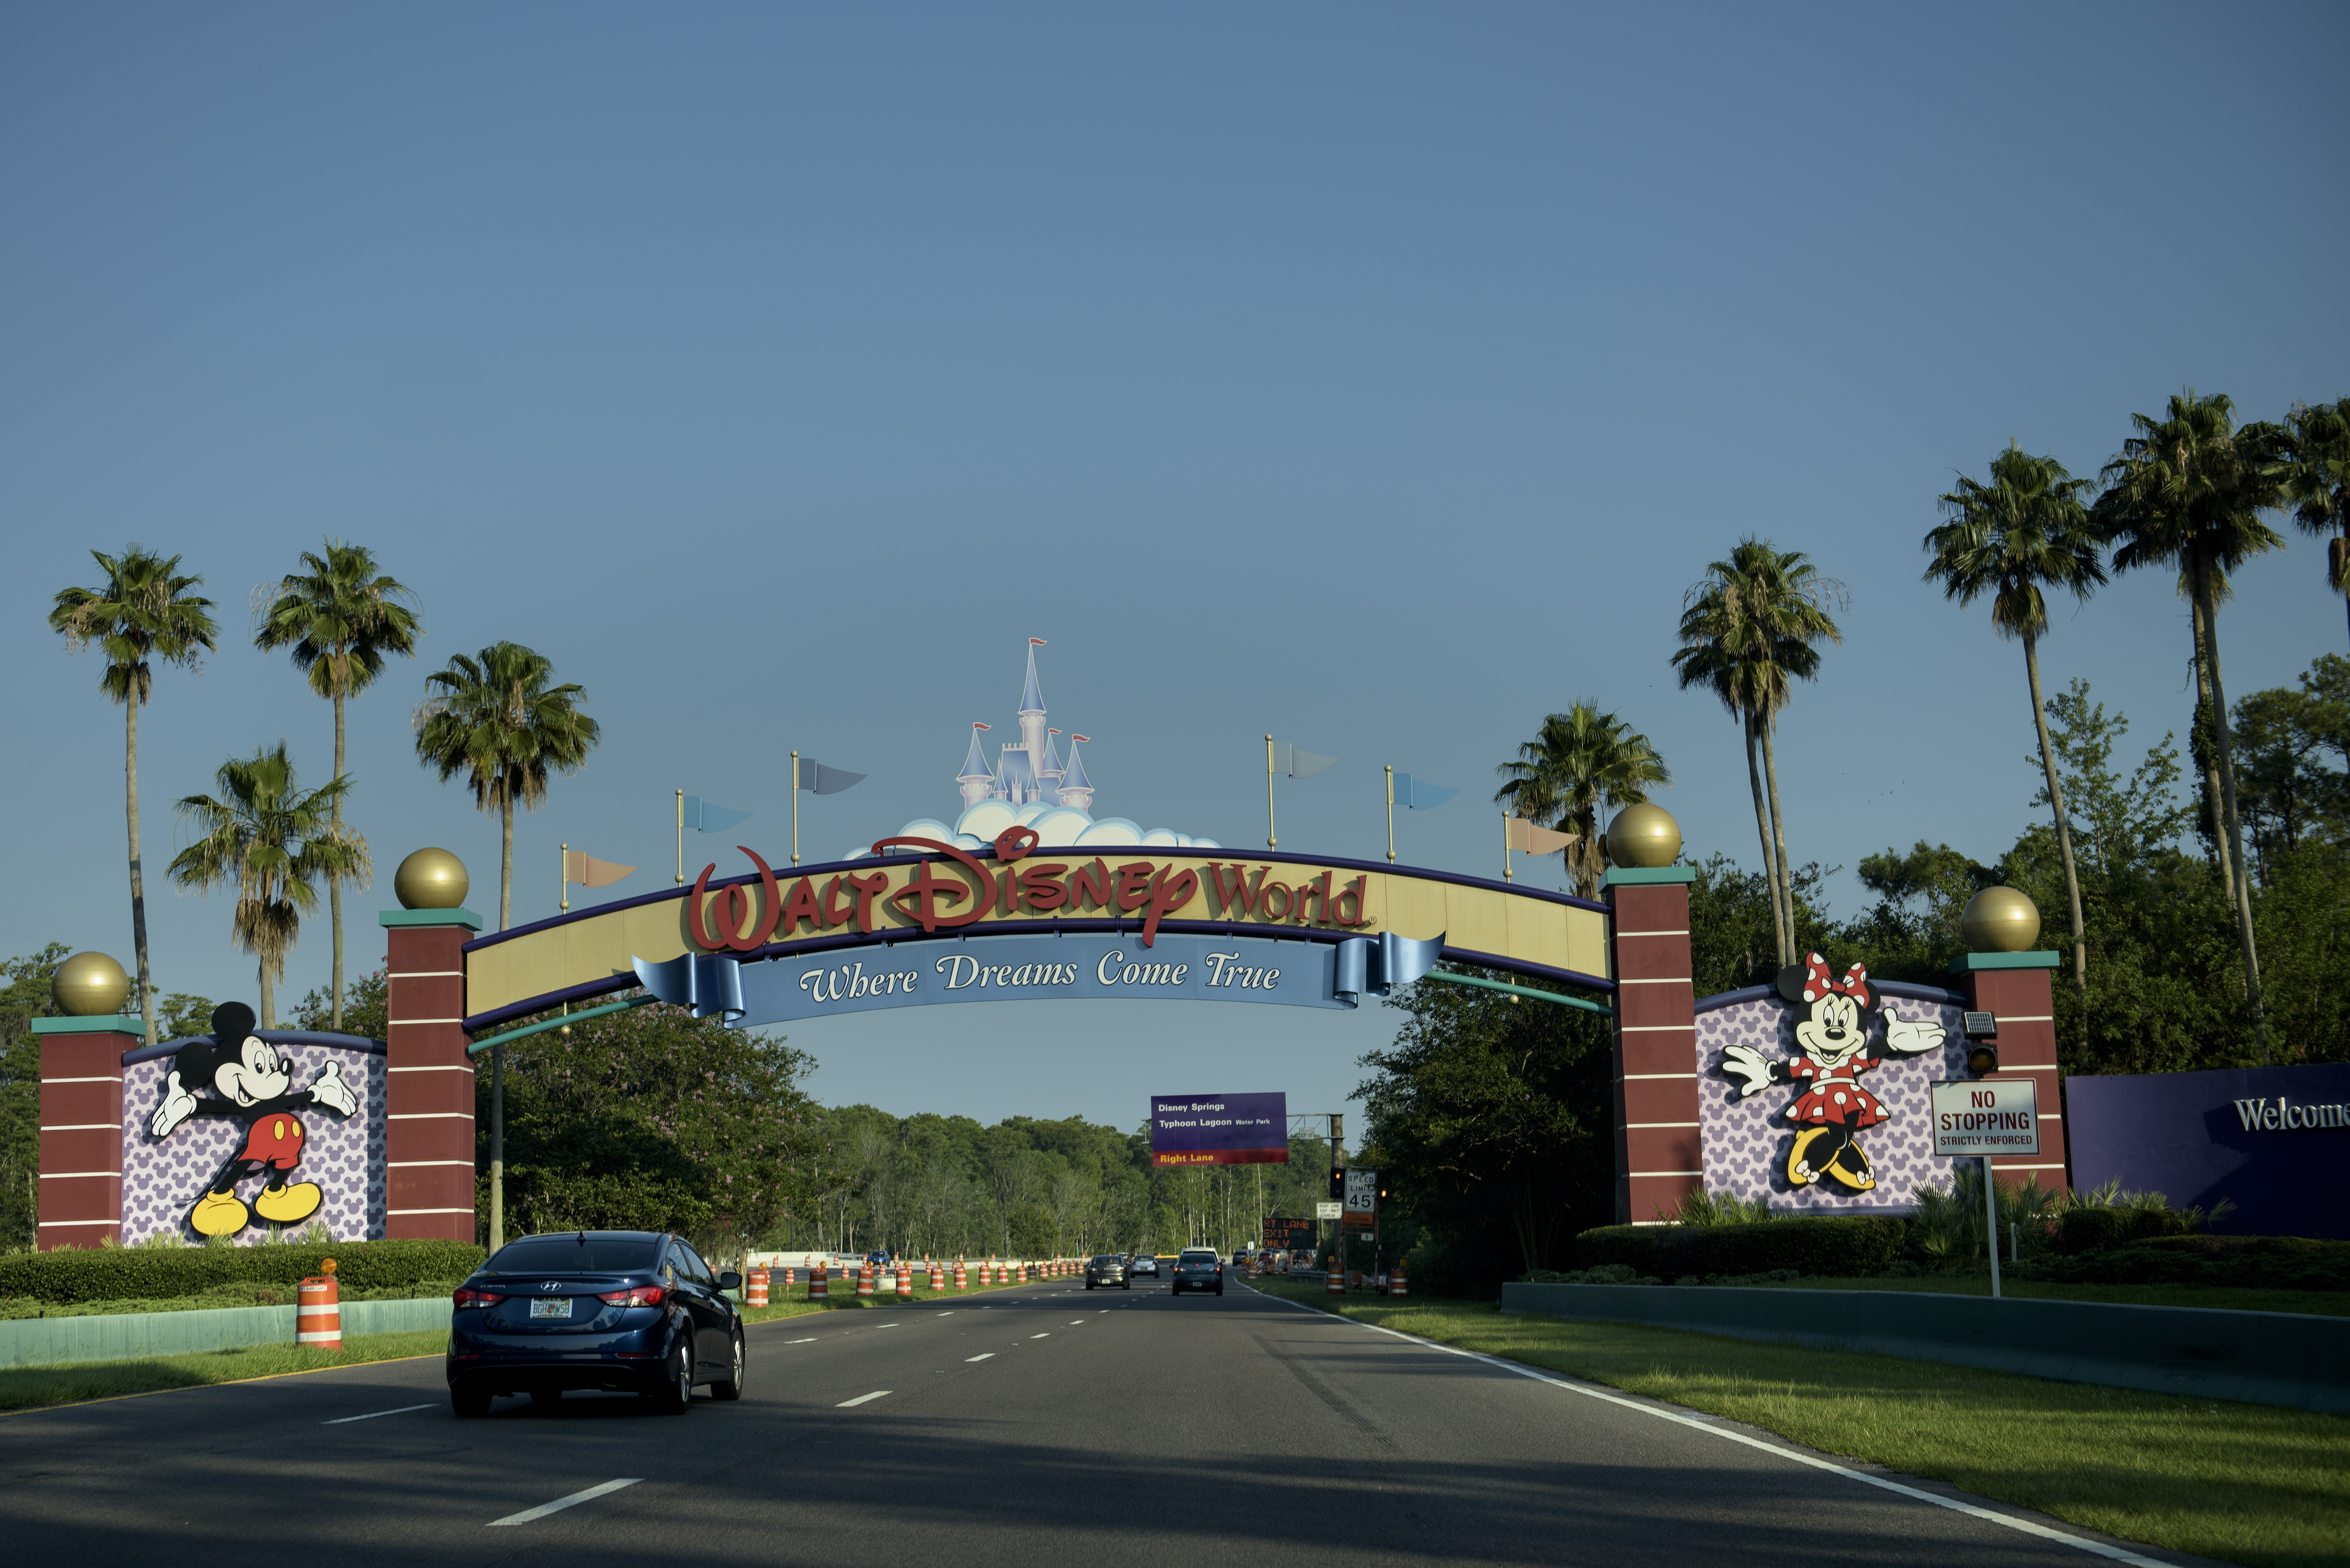 The entrance to the Walt Disney World theme park is seen June 15, 2016 in Orlando, Florida where a two-year-old boy was attacked by an alligator at the Seven Seas Lagoon by the Grand Floridian hotel. An American family's Disney vacation turned into a nightmare when an alligator snatched a two-year-old boy at the shore of a resort lake and fought off the father's frantic attempts to wrest the toddler from its mouth, officials said Wednesday. A search and rescue operation was launched after the attack Tuesday night at the Grand Floridian hotel not far from the Magic Kingdom was ongoing, but police said they held out little hope the boy would be found alive.  / AFP PHOTO / Brendan Smialowski